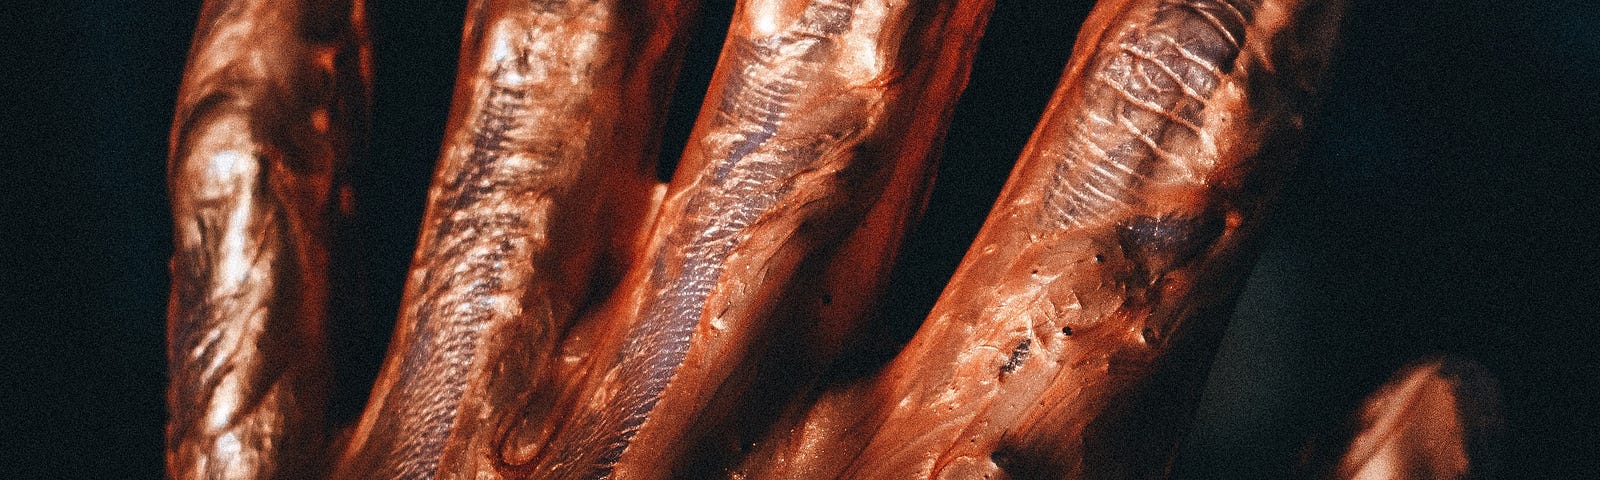 Dark close up of a human hand, covered in metallic orange paint with gooey strands stretching between each finger.